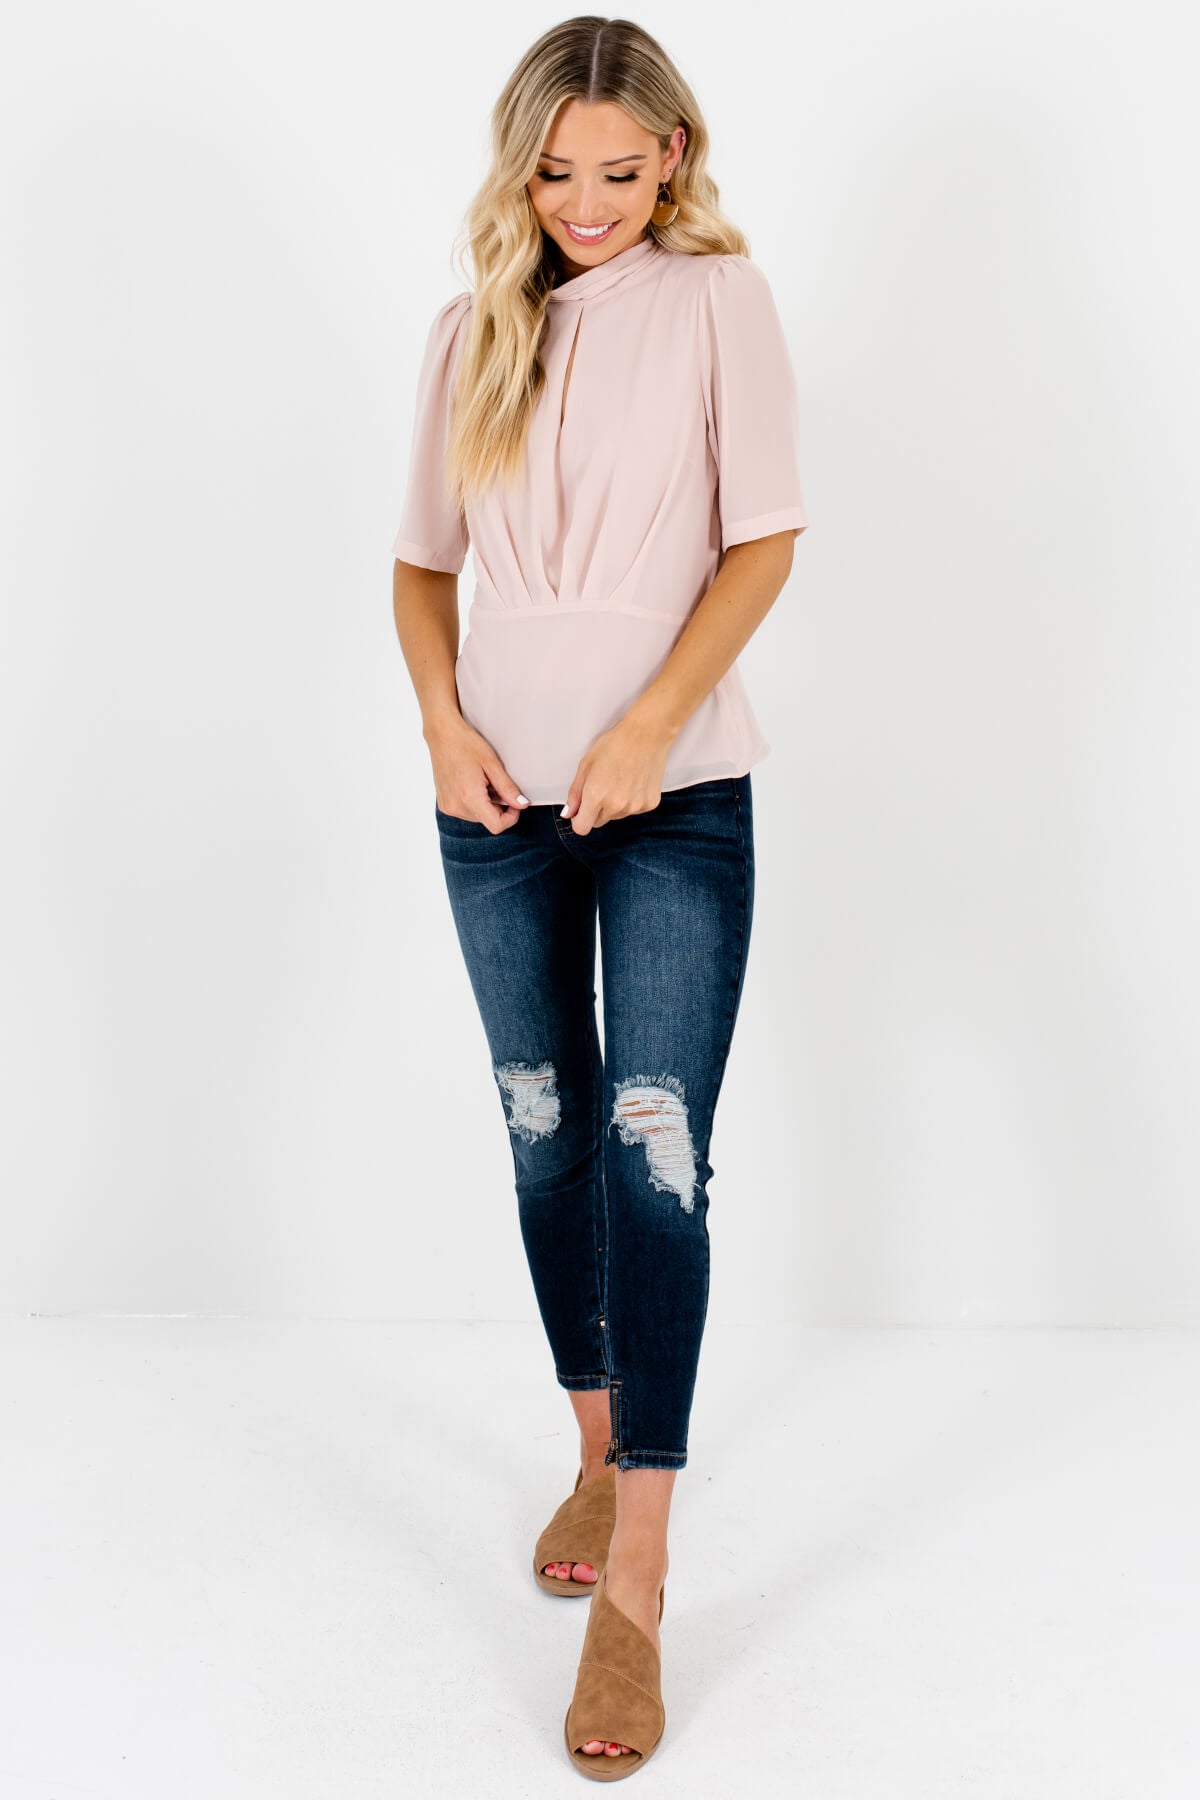 Blush Pink Cute and Comfortable Boutique Blouses for Women